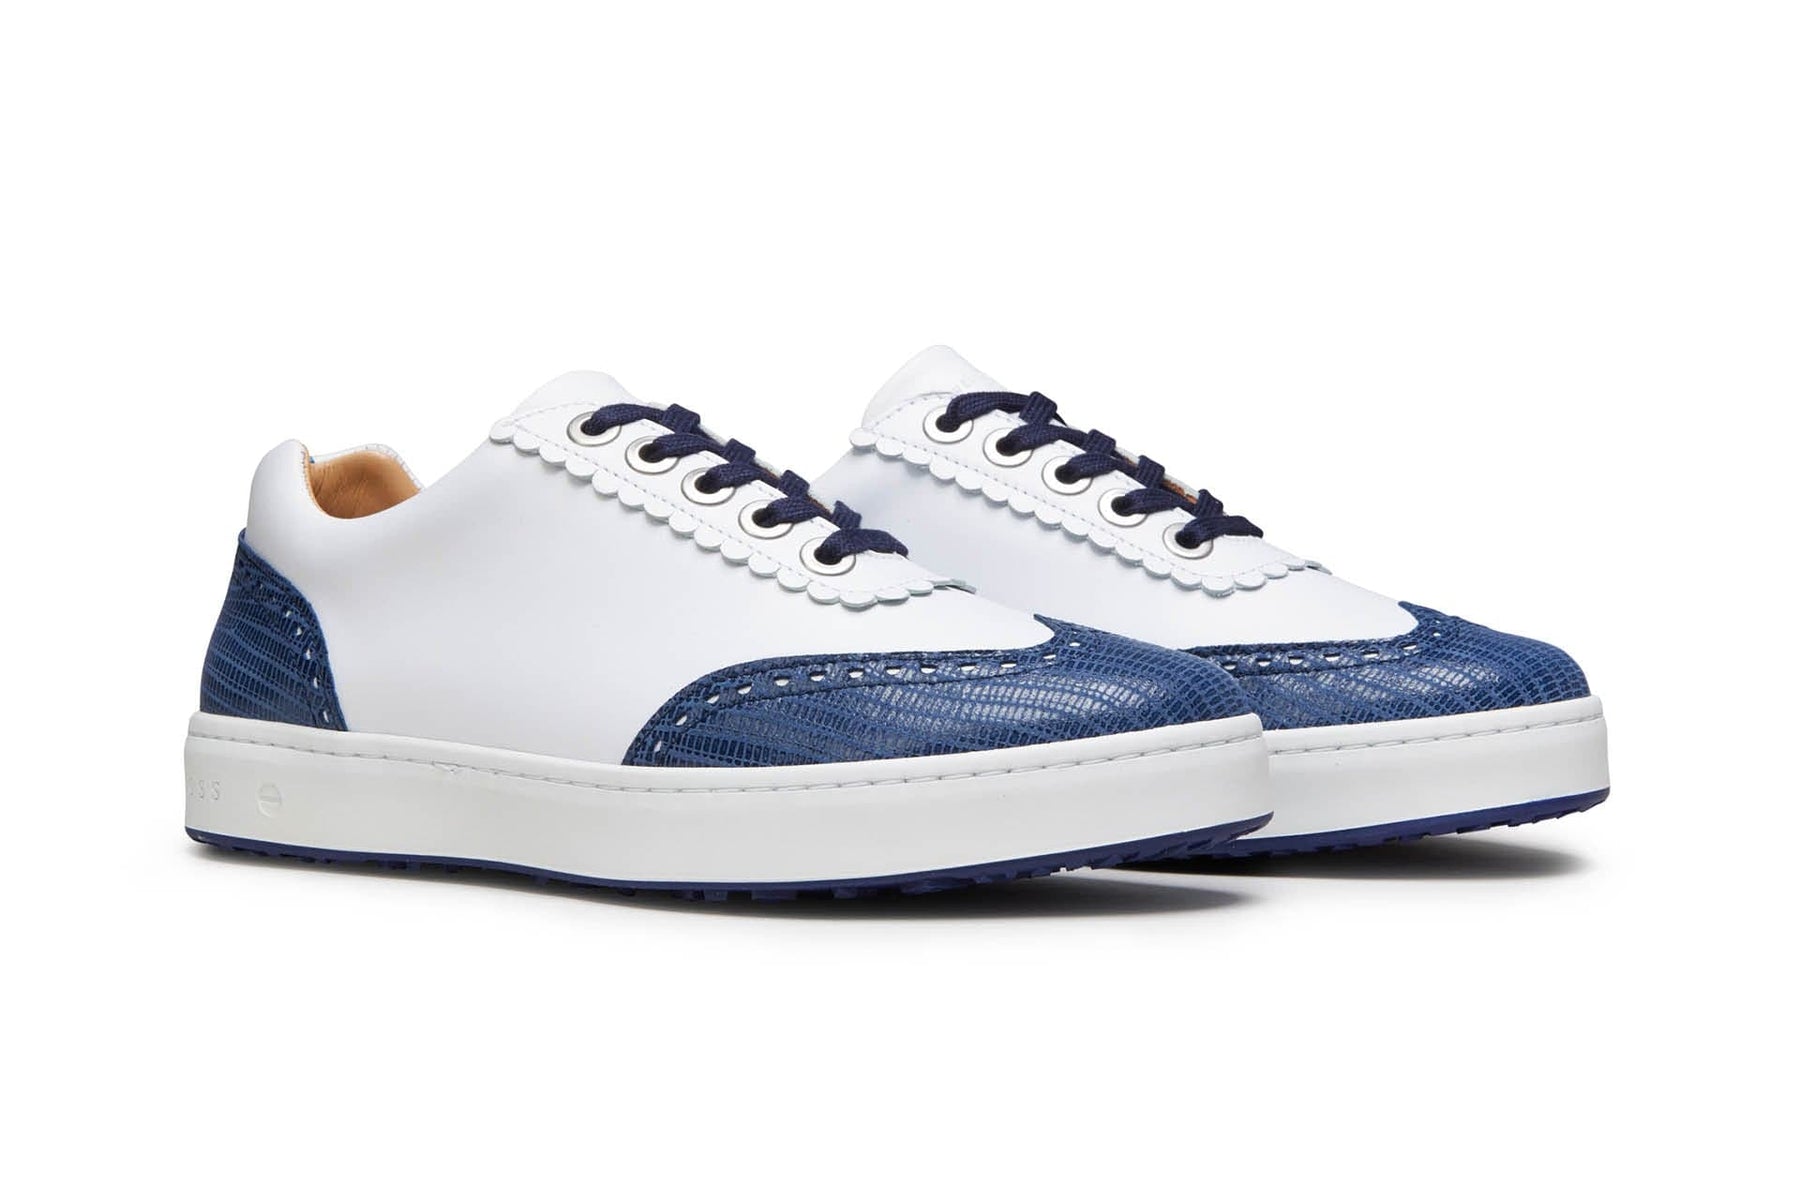 Royal Albartross Golf Shoes Review: The Game-Changer Your Golf Game Needs!